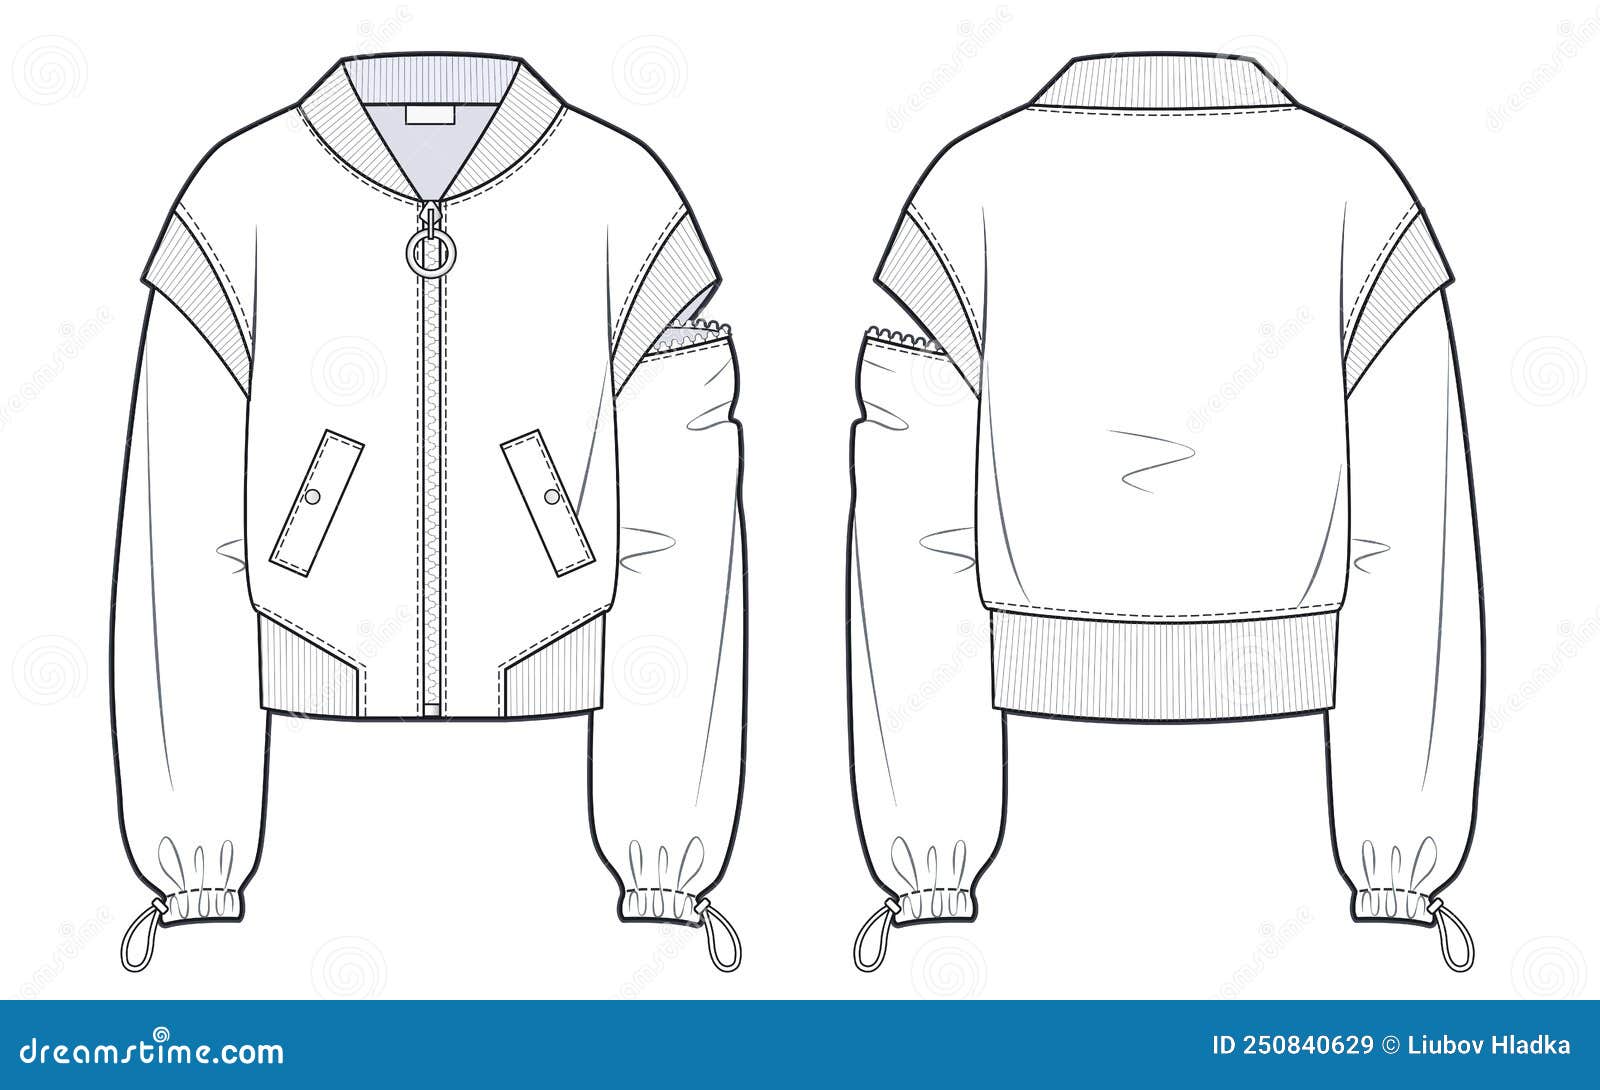 Bomber Jacket Template  Free Vectors  PSDs to Download